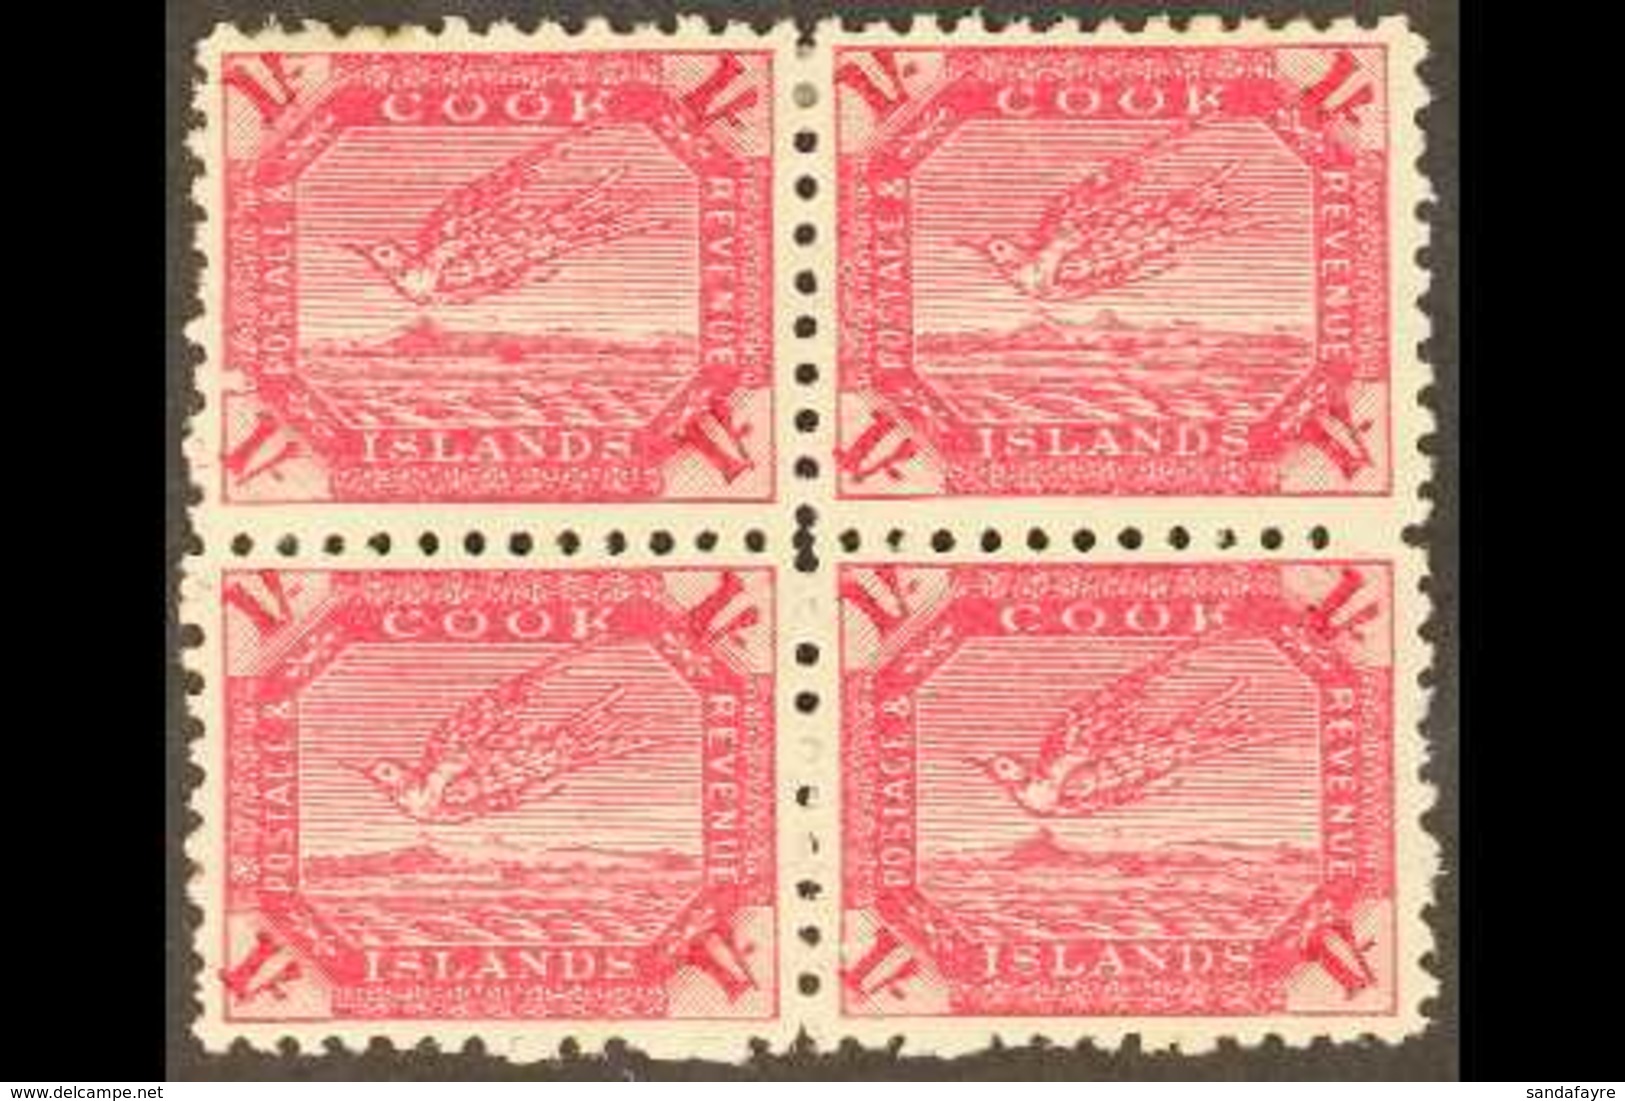 1893-1900 (perf 11) 1s Deep Carmine Torea (SG 20a) - A Very Fine Mint BLOCK OF FOUR, The Lower Pair NEVER HINGED. For Mo - Cook